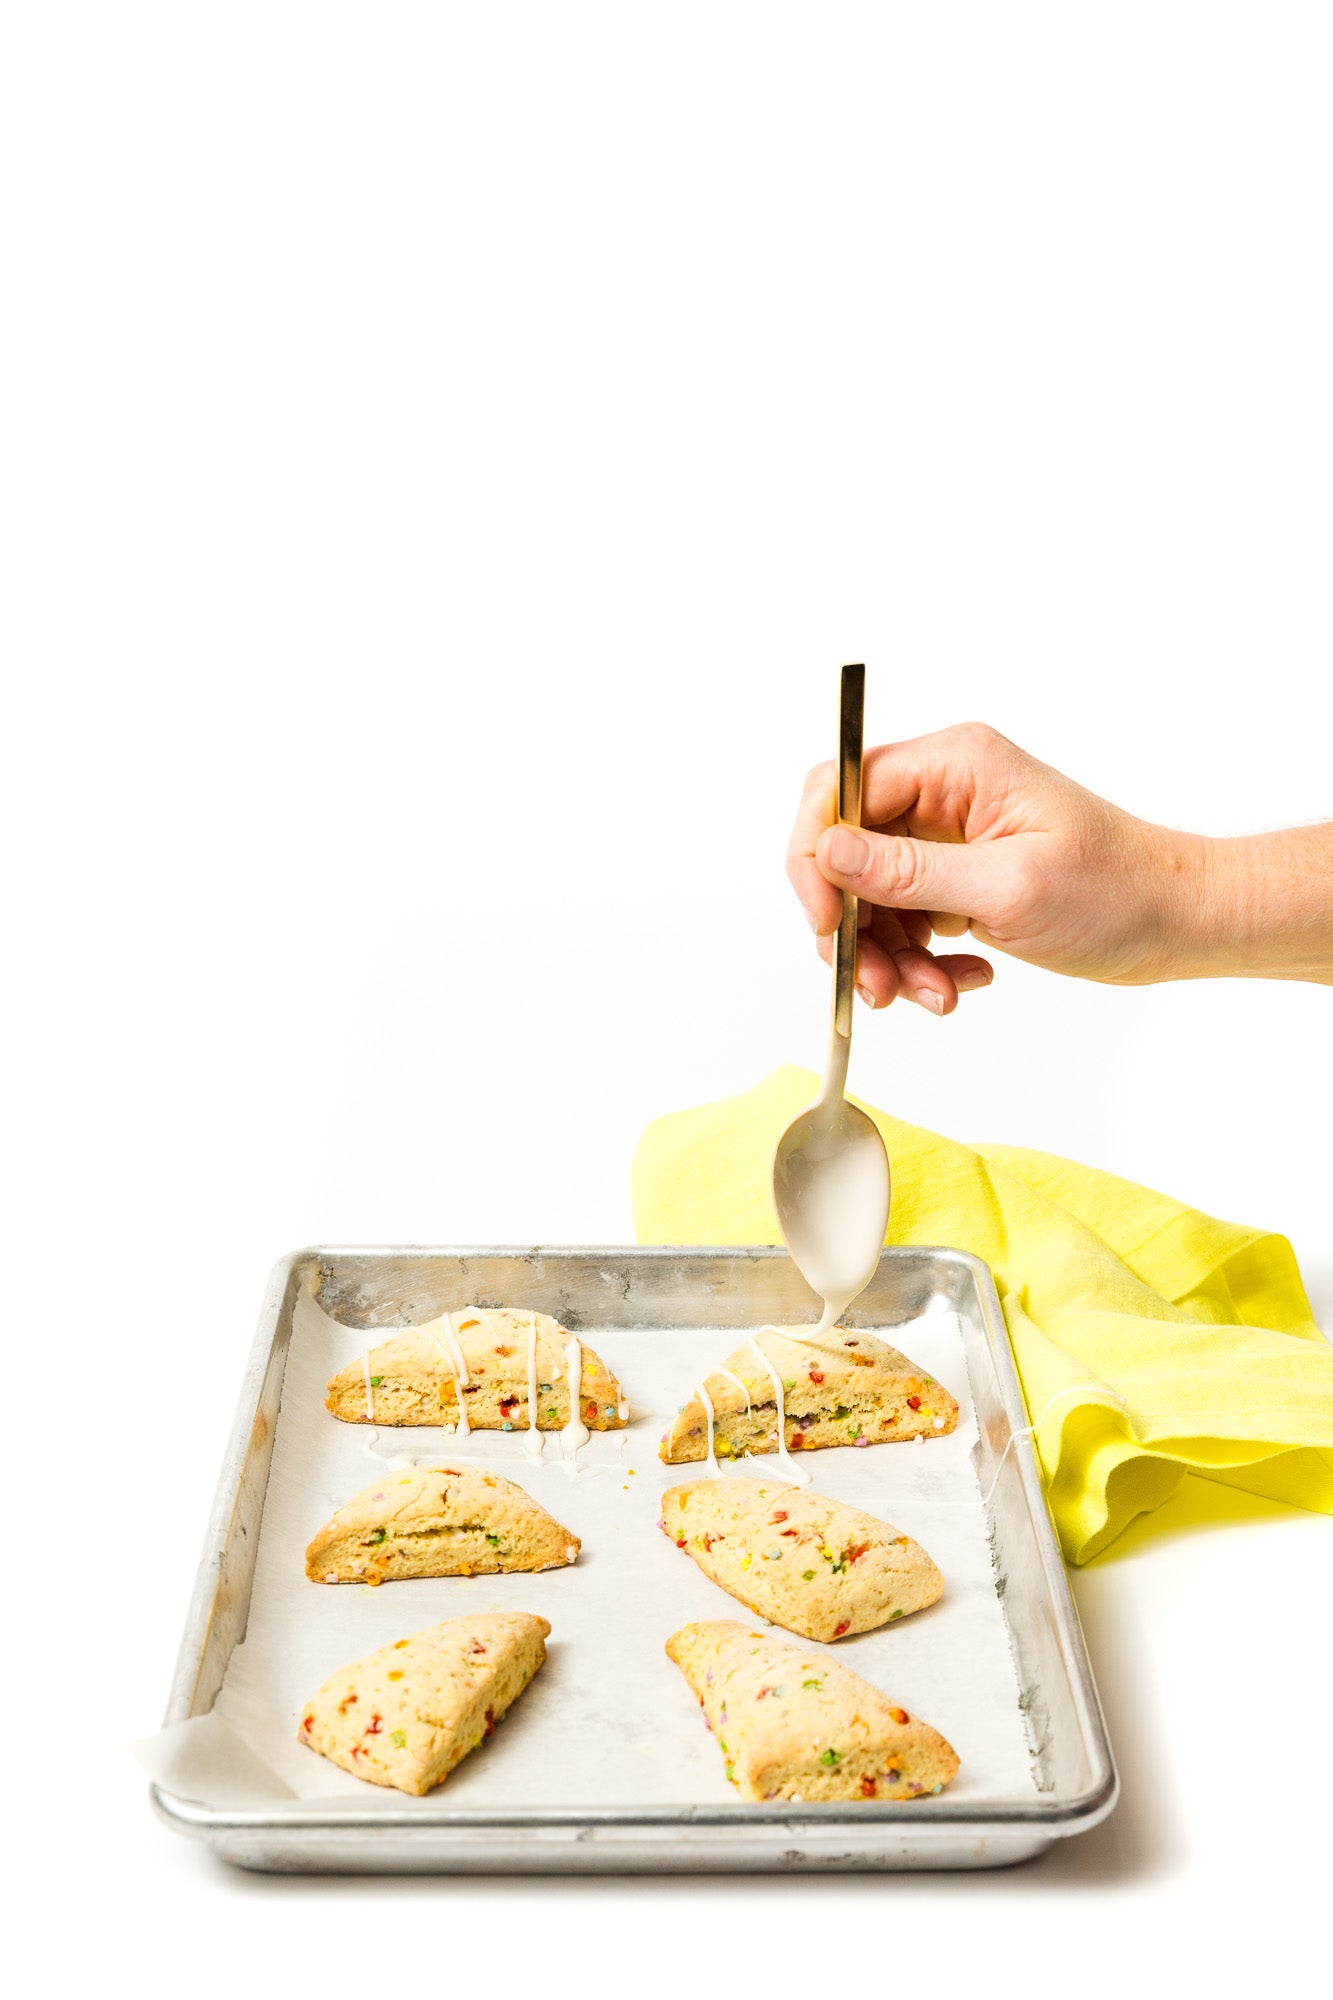 Image of hand glazing six Miss Jones Baking Co Confetti Pop Cookie Mix Sprinkle Scones on a baking sheet